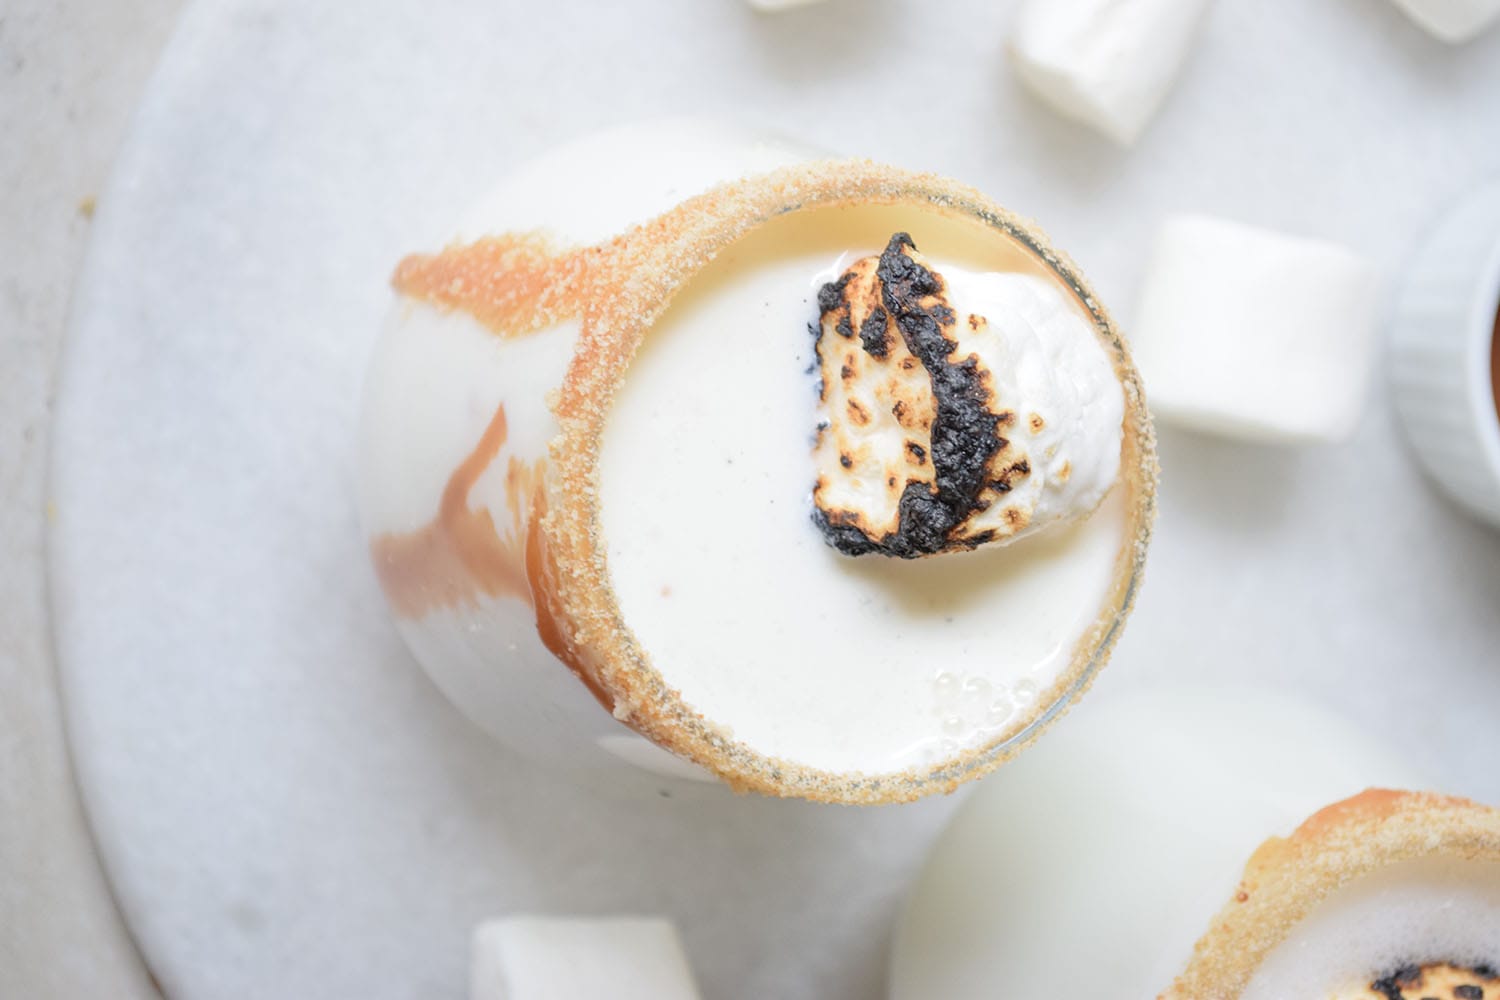 This roasted marshmallow cocktail recipe is one of my favorites ever, and it's so easy! Doesn't it look heavenly?